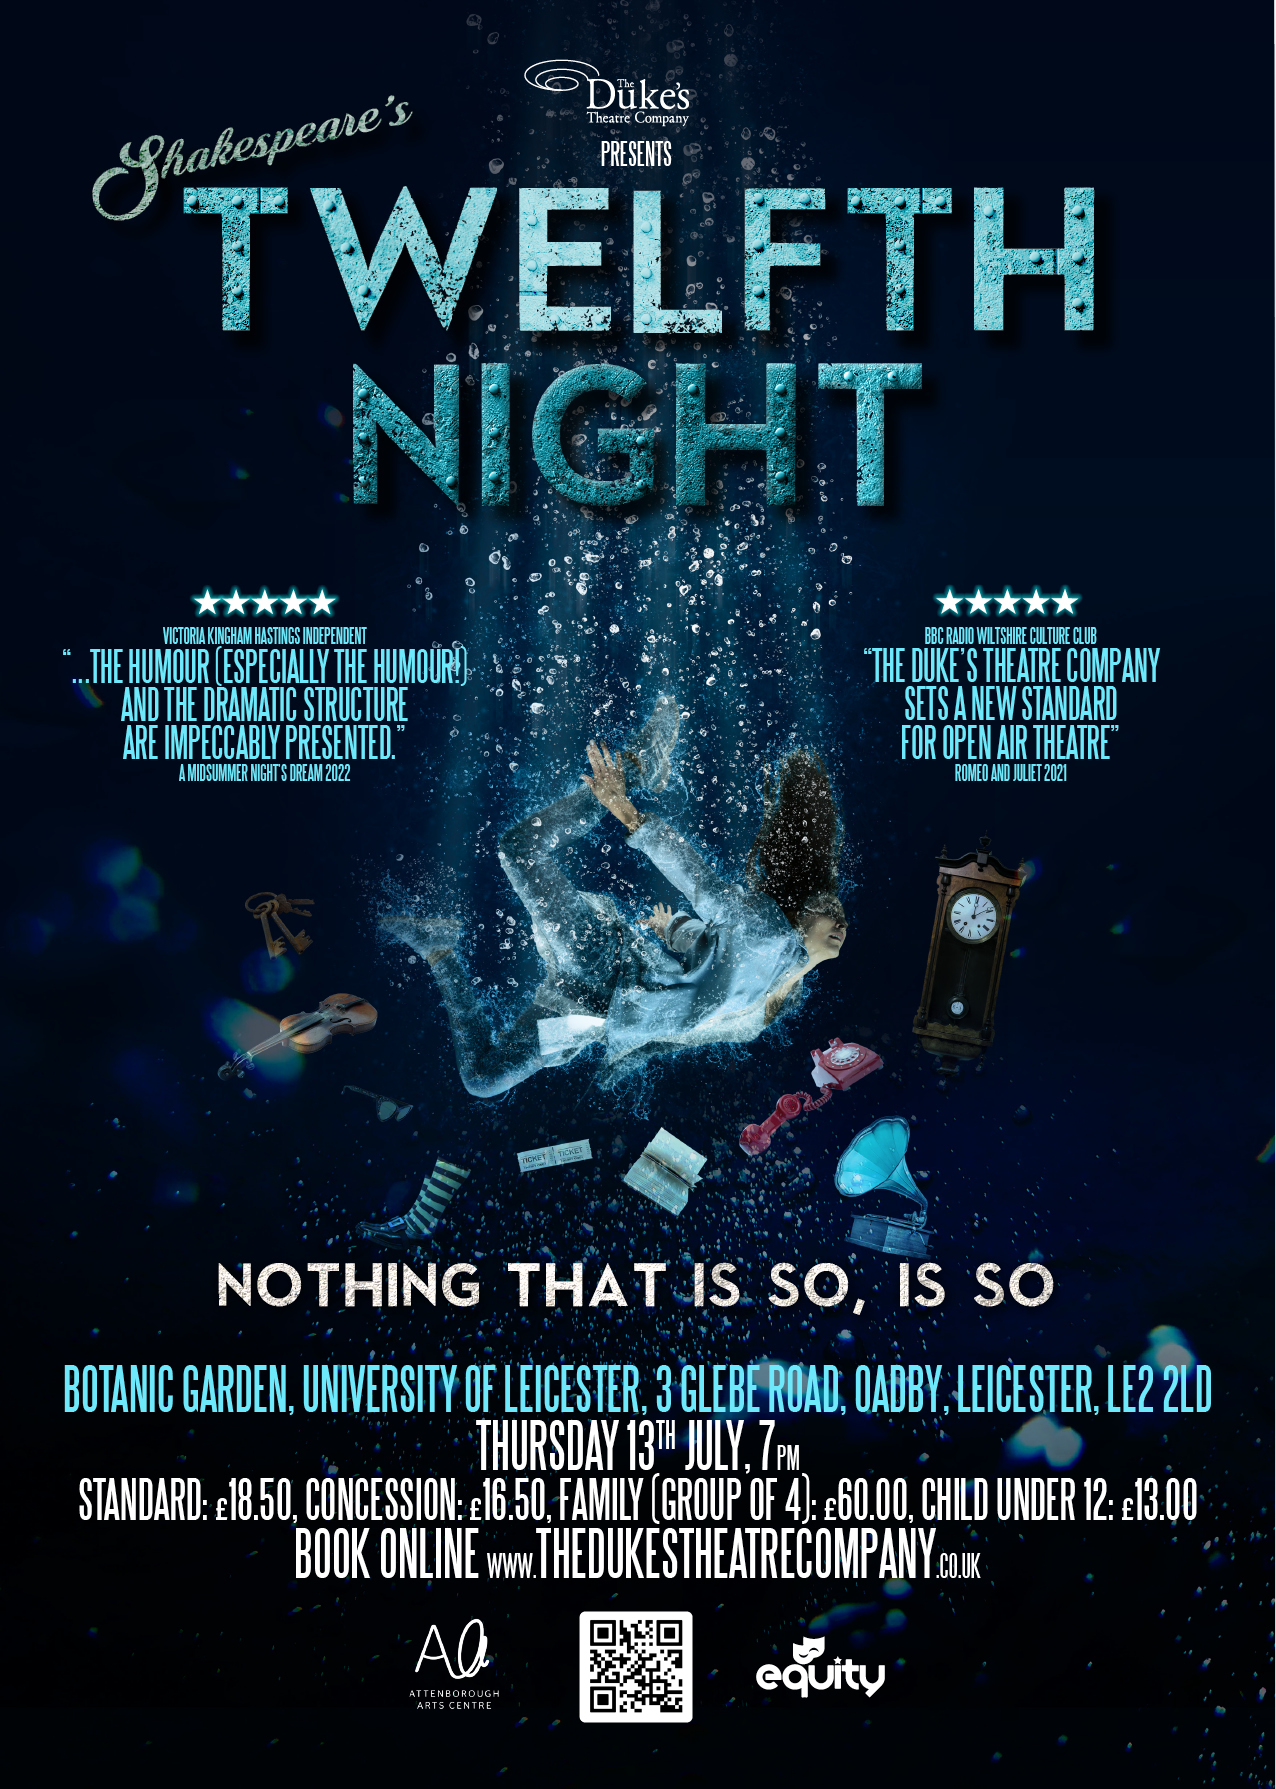 Poster for the performance of Twelfth Night at 7pm on Thursday 13 July at the Botanic Garden.